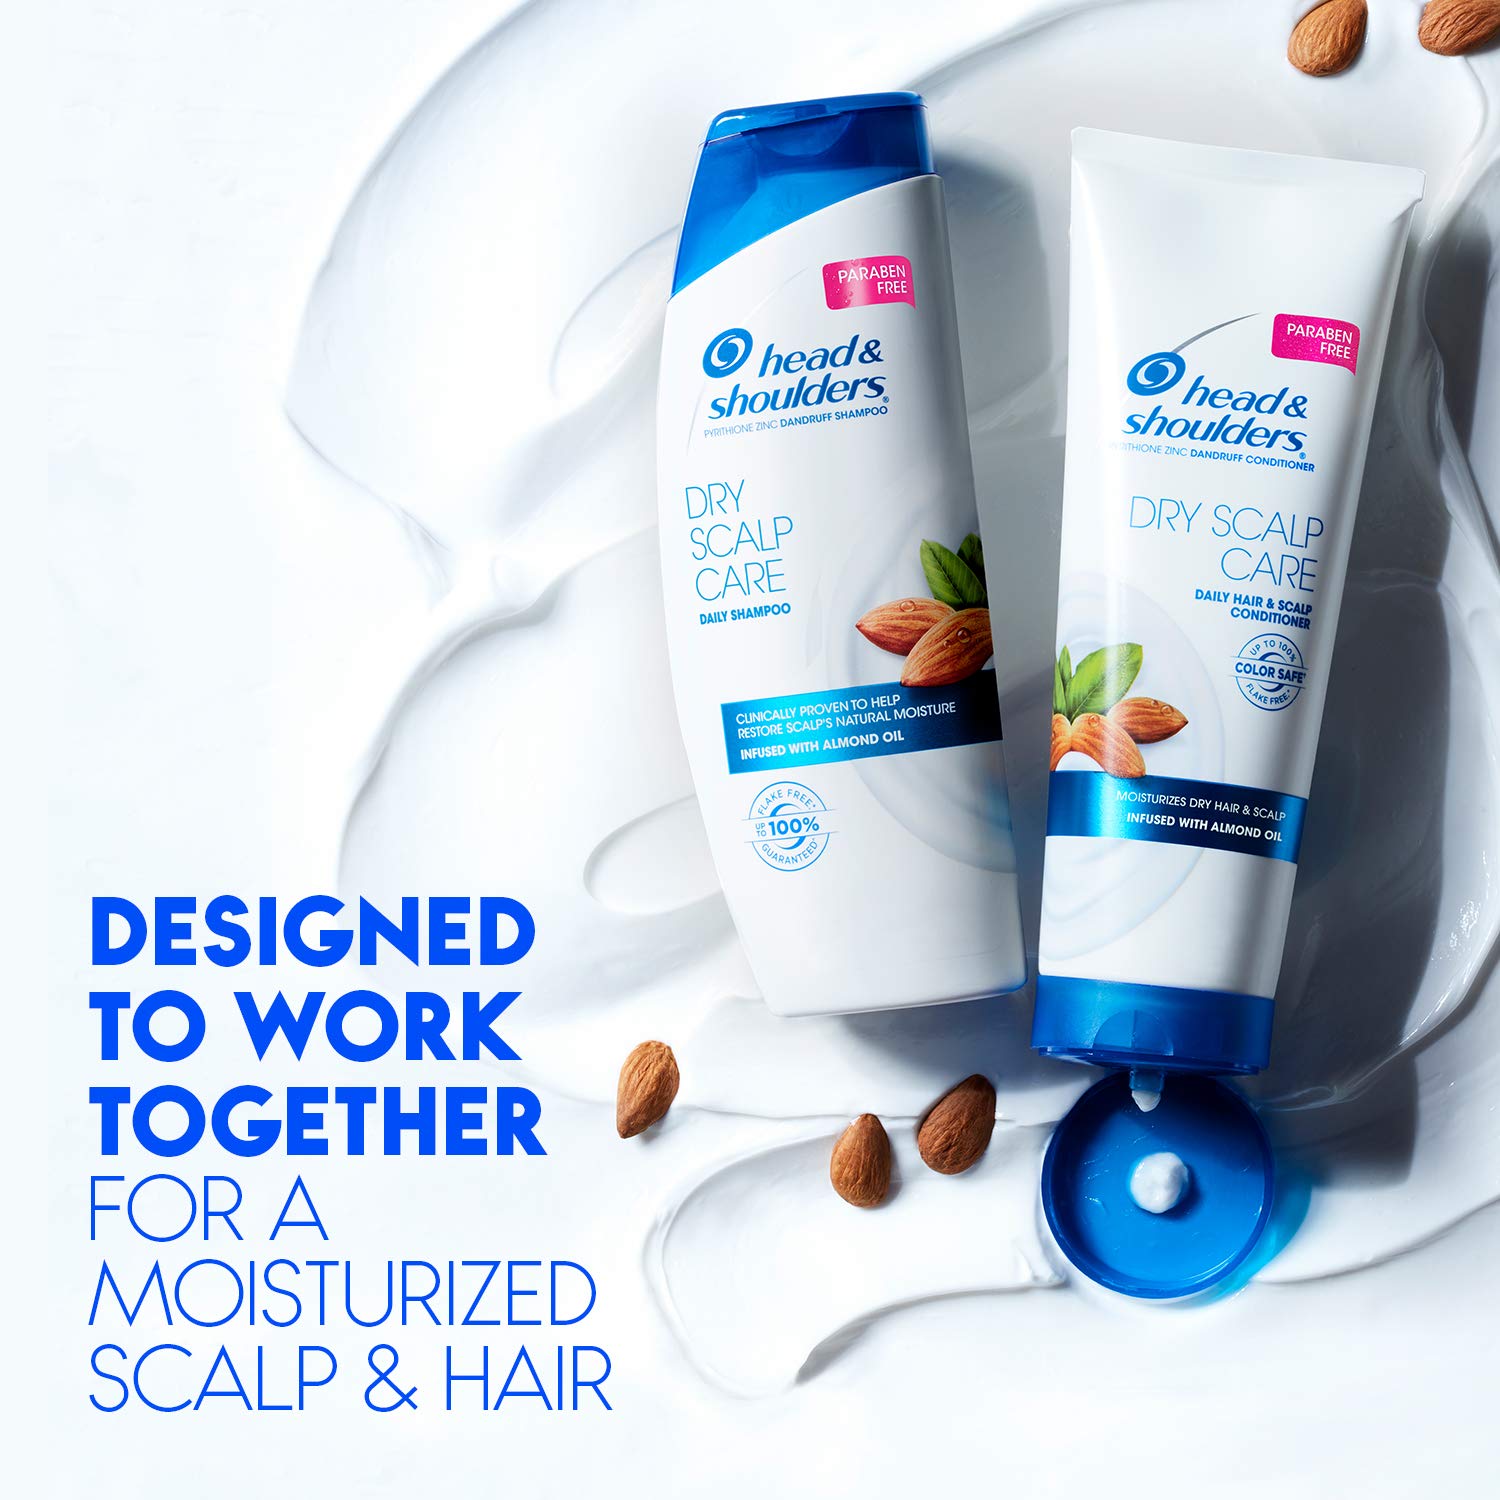 Head and Shoulders Shampoo, Daily-Use Anti-Dandruff Paraben Free Treatment, Dry Scalp Care with Almond Oil, 32.1 fl oz, Twin Pack (Packaging May Vary)